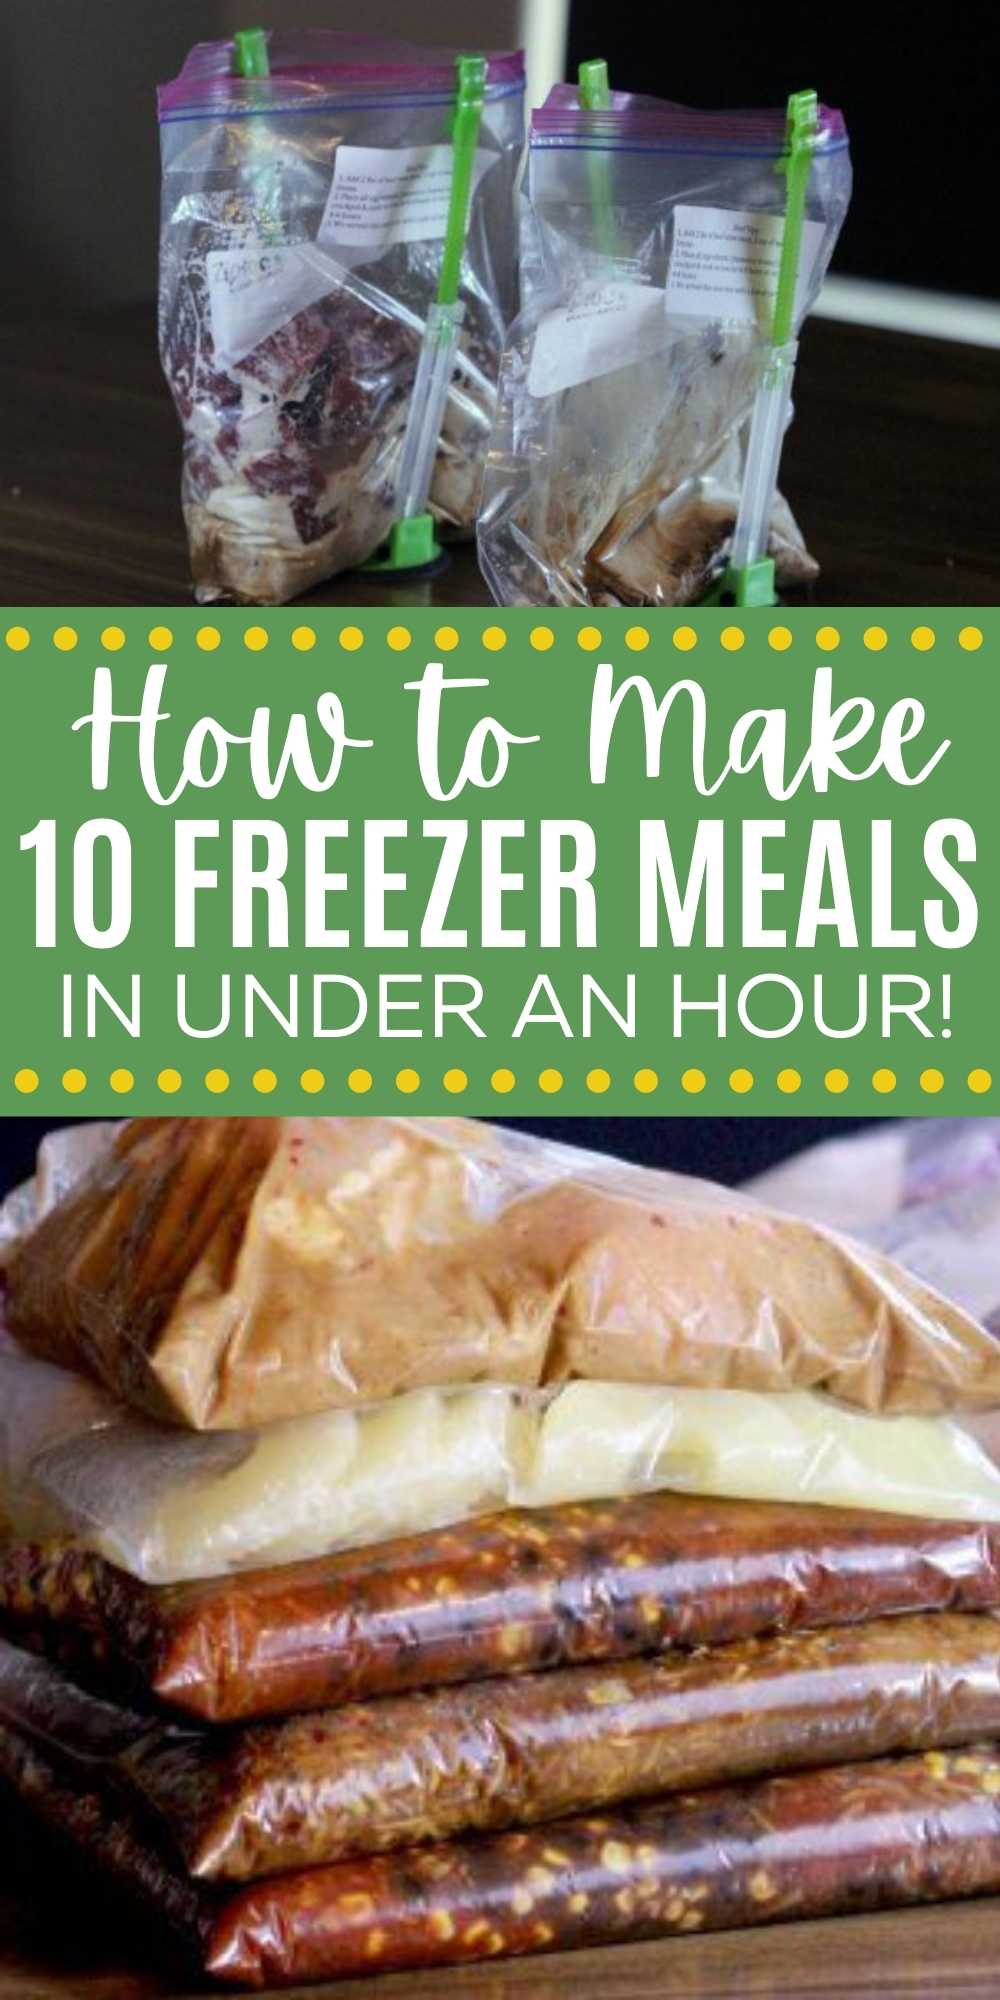 Check out this fun set of 10 crock pot Make ahead Meals that you can make in under an hour. These easy Make ahead Meals are easy to make and freeze great. Learn how to make freezer meals in under 1 hour.  You’ll be surprised how easy it is to make crock pot freezer meals.  #eatingonadime #freezermeals #crockpotrecipes #freezercooking 